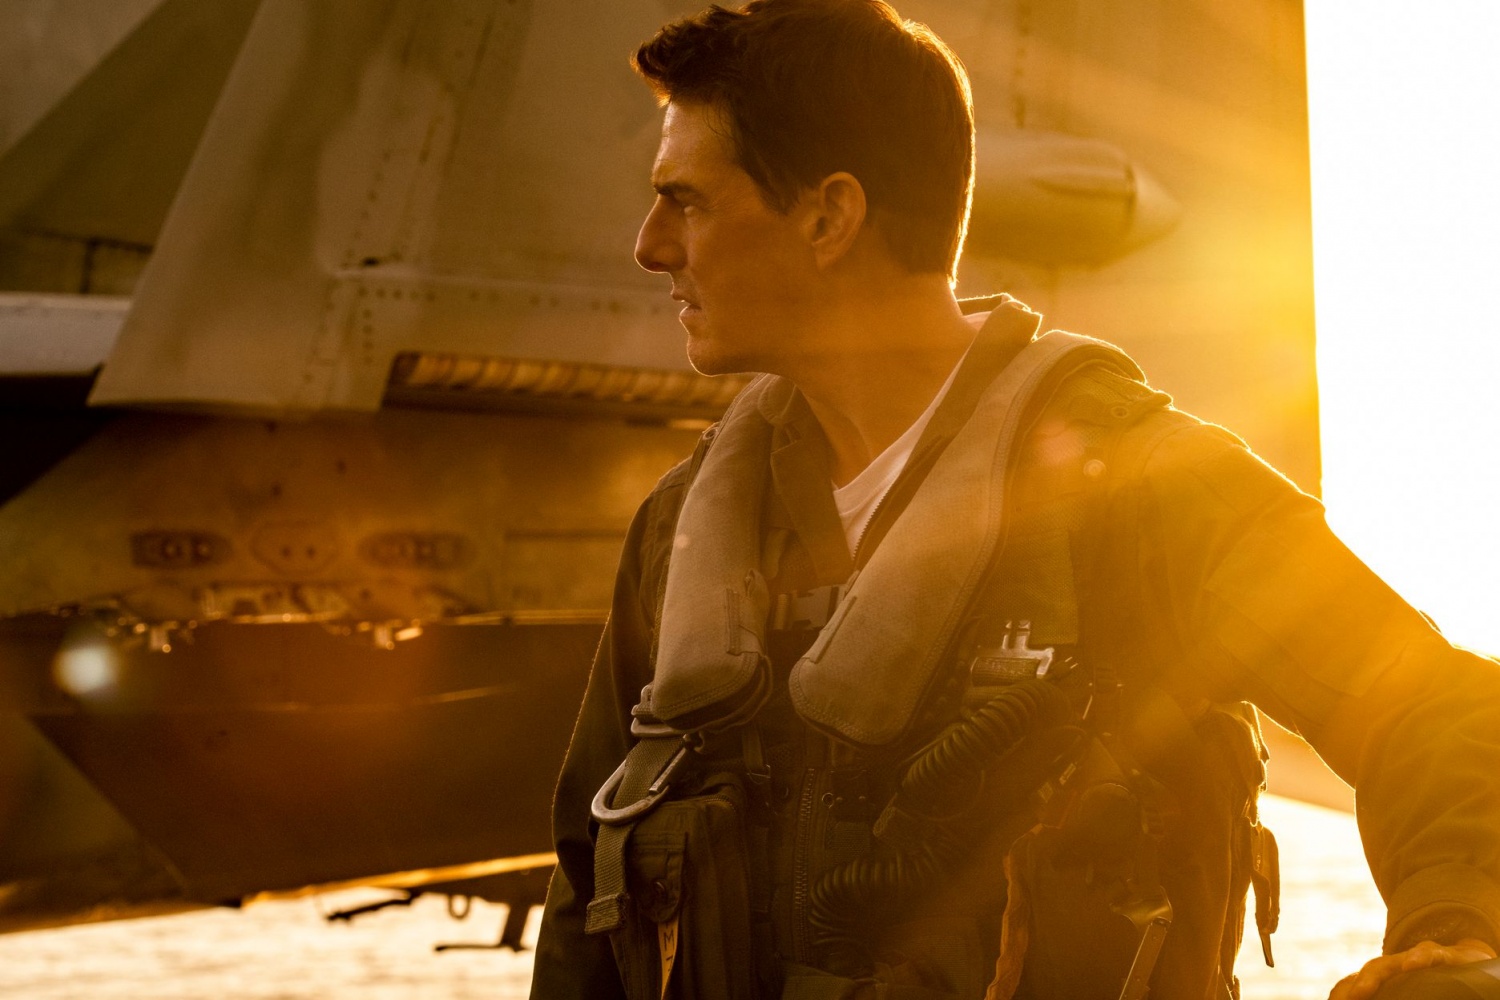 Tom Cruise plays Capt. Pete "Maverick" Mitchell in Top Gun: Maverick from Paramount Pictures, Skydance and Jerry Bruckheimer Films. Credit: Scott Garfield. © 2019 Paramount Pictures Corporation. All rights reserved